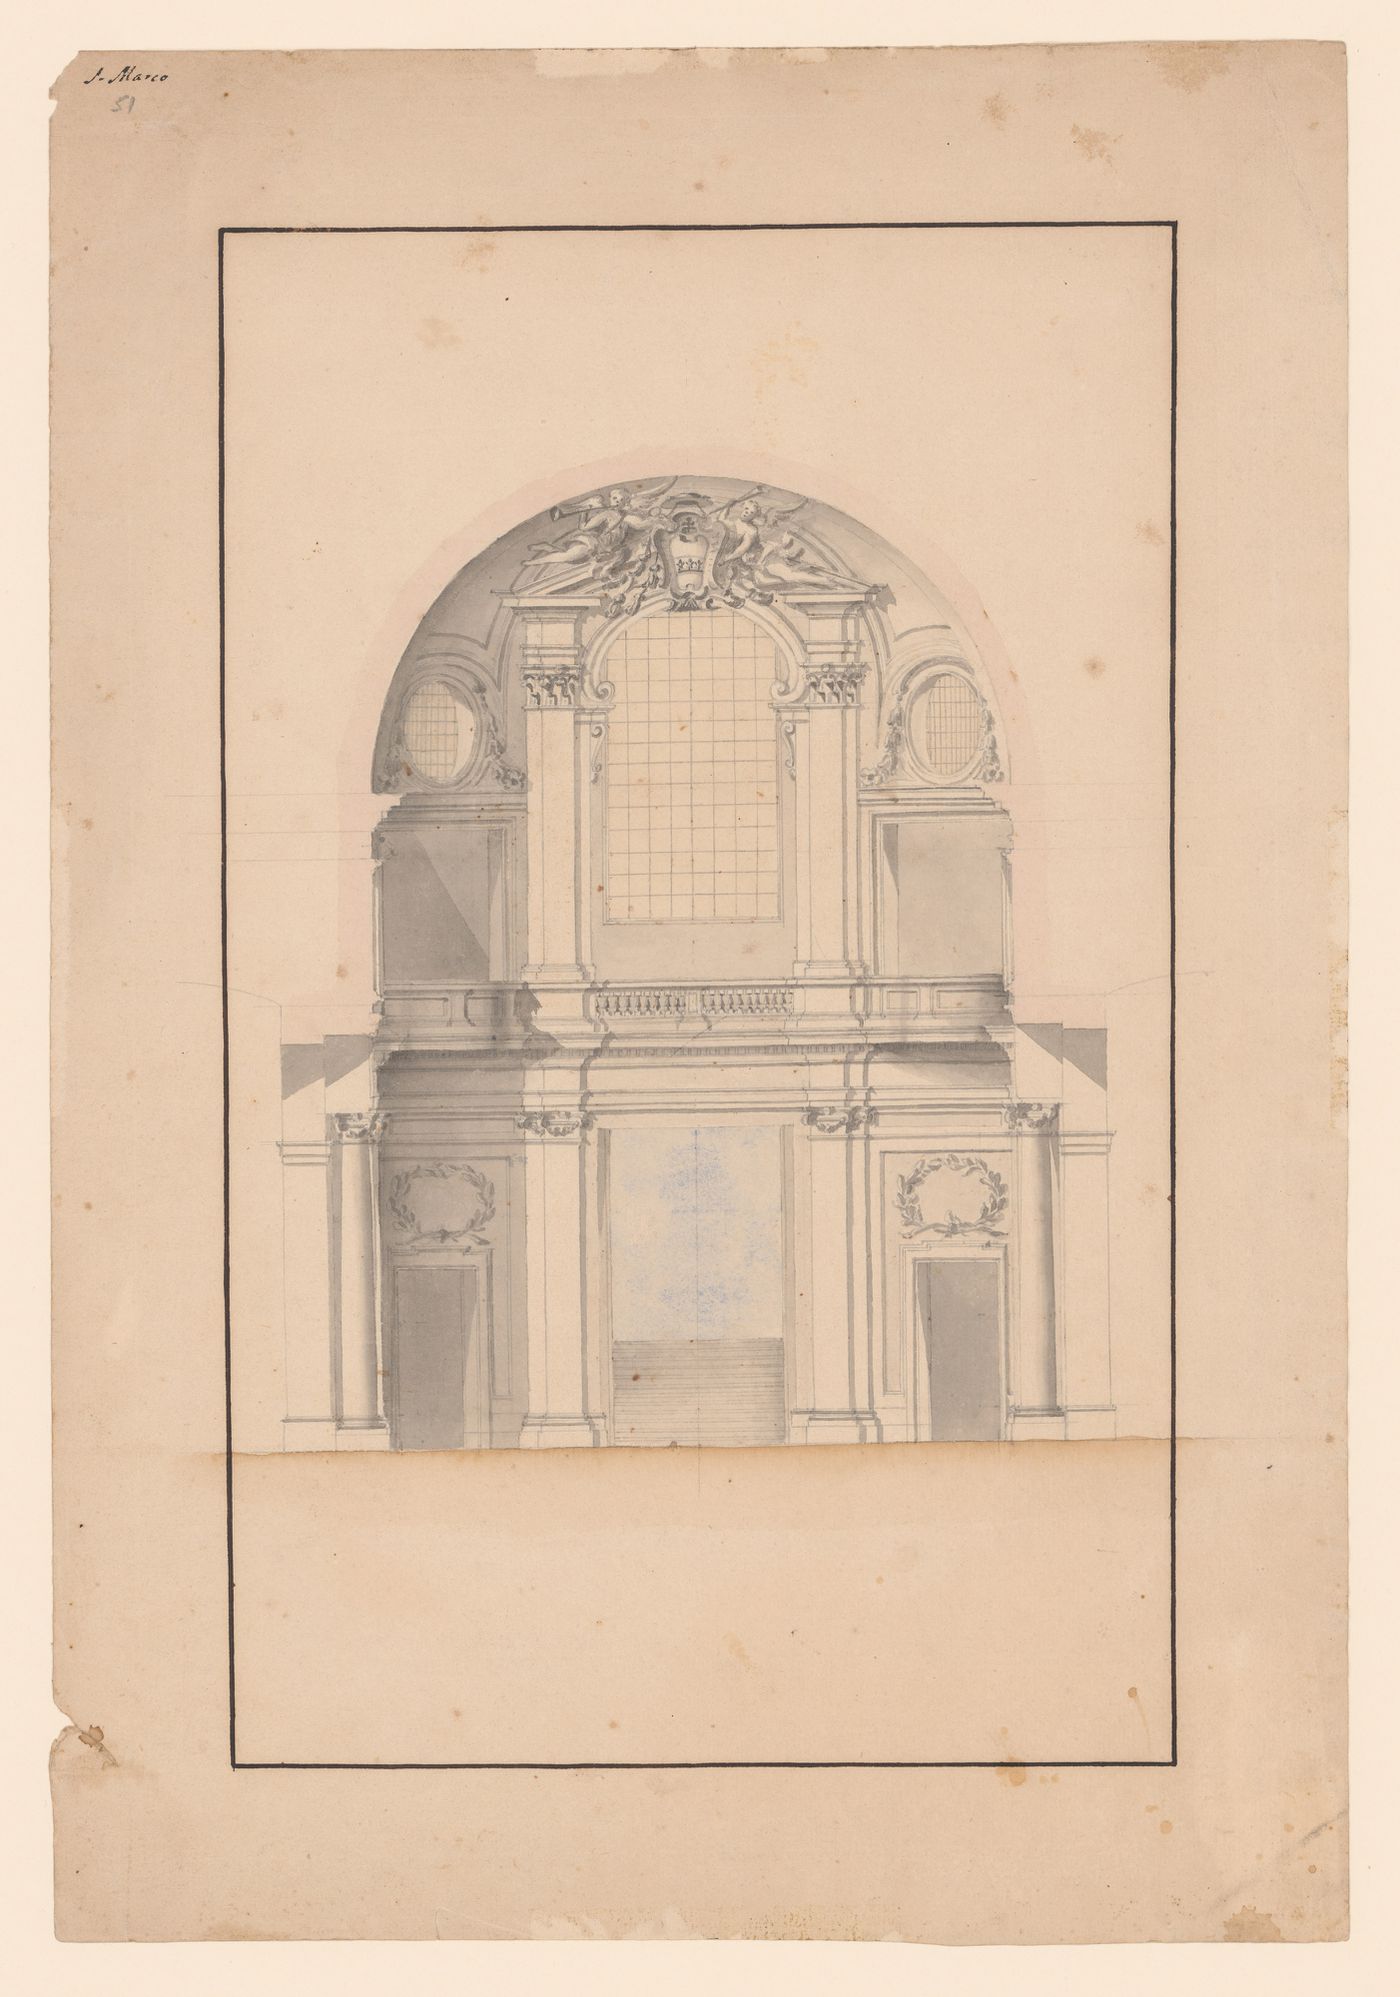 Section for the nave of San Marco showing the interior decoration of the entrance wall, Rome